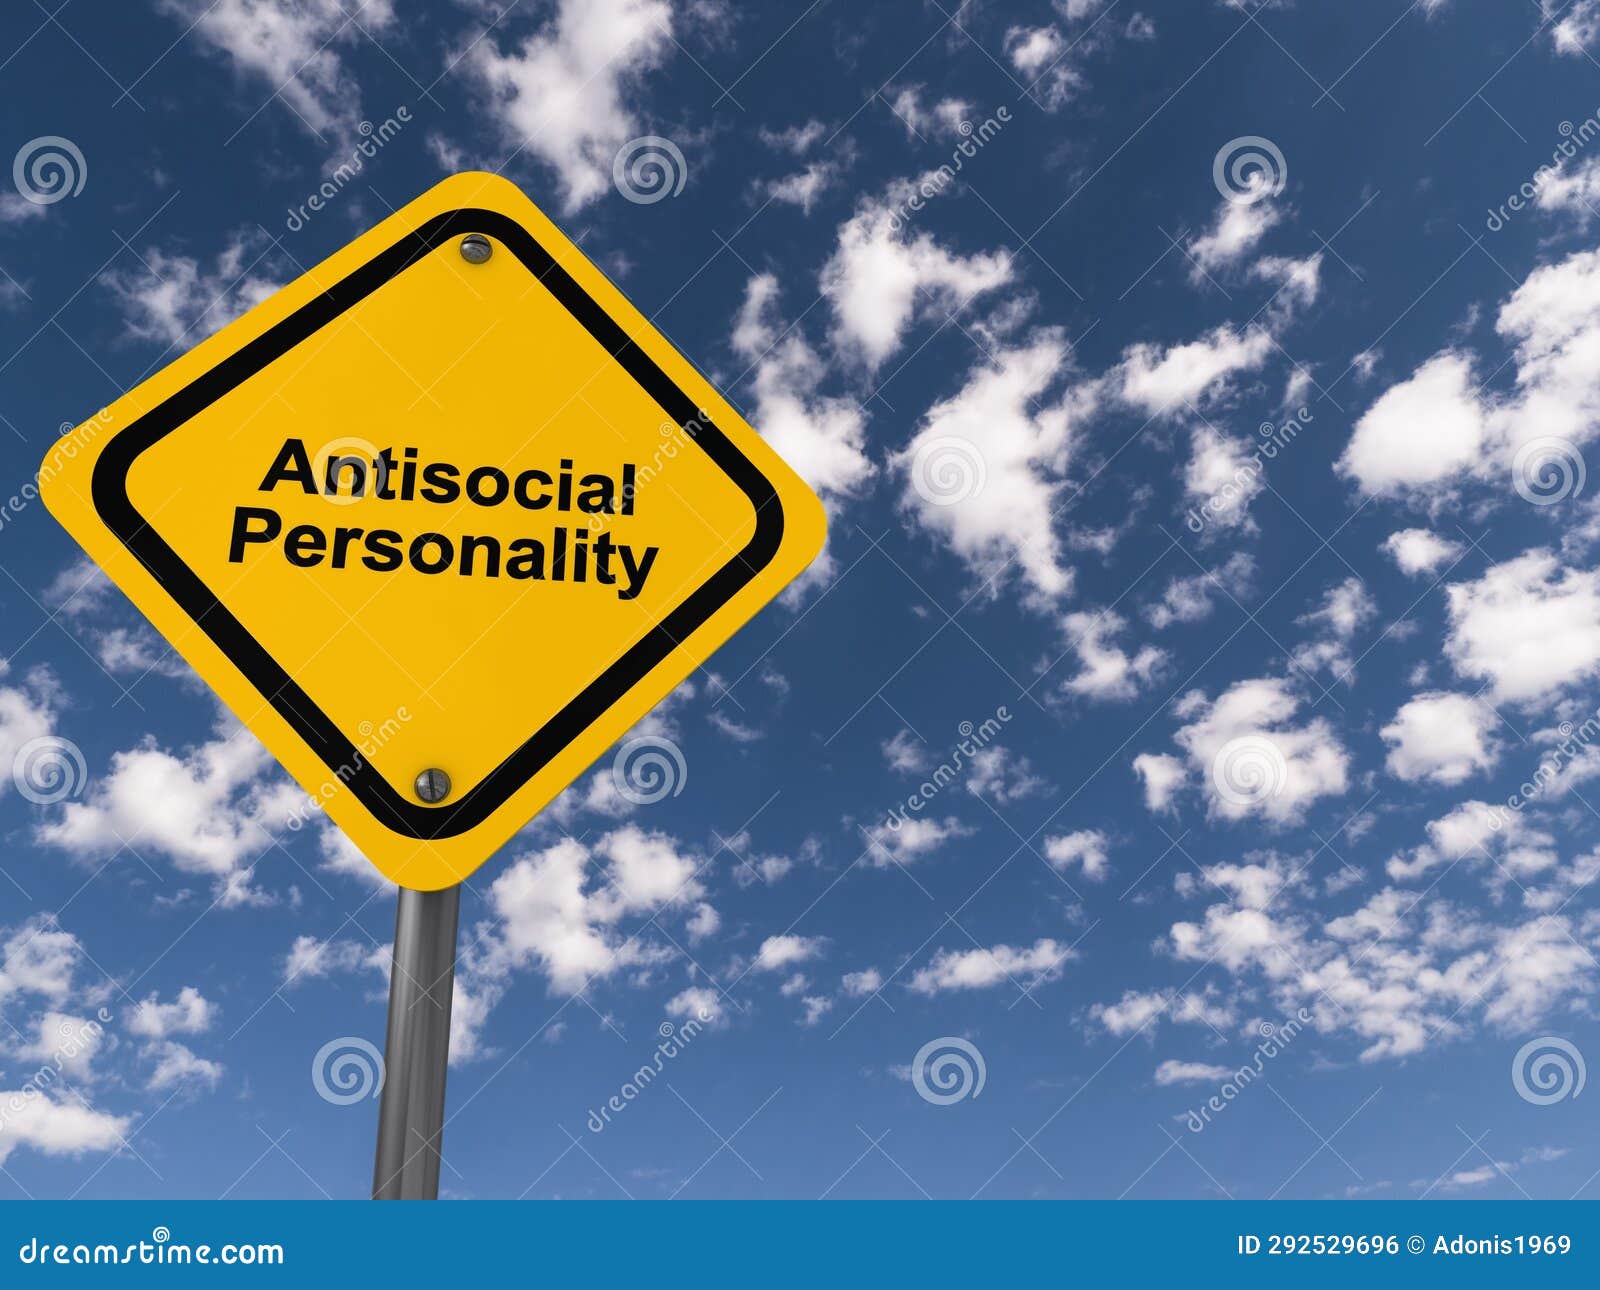 antisocial personality traffic sign on blue sky